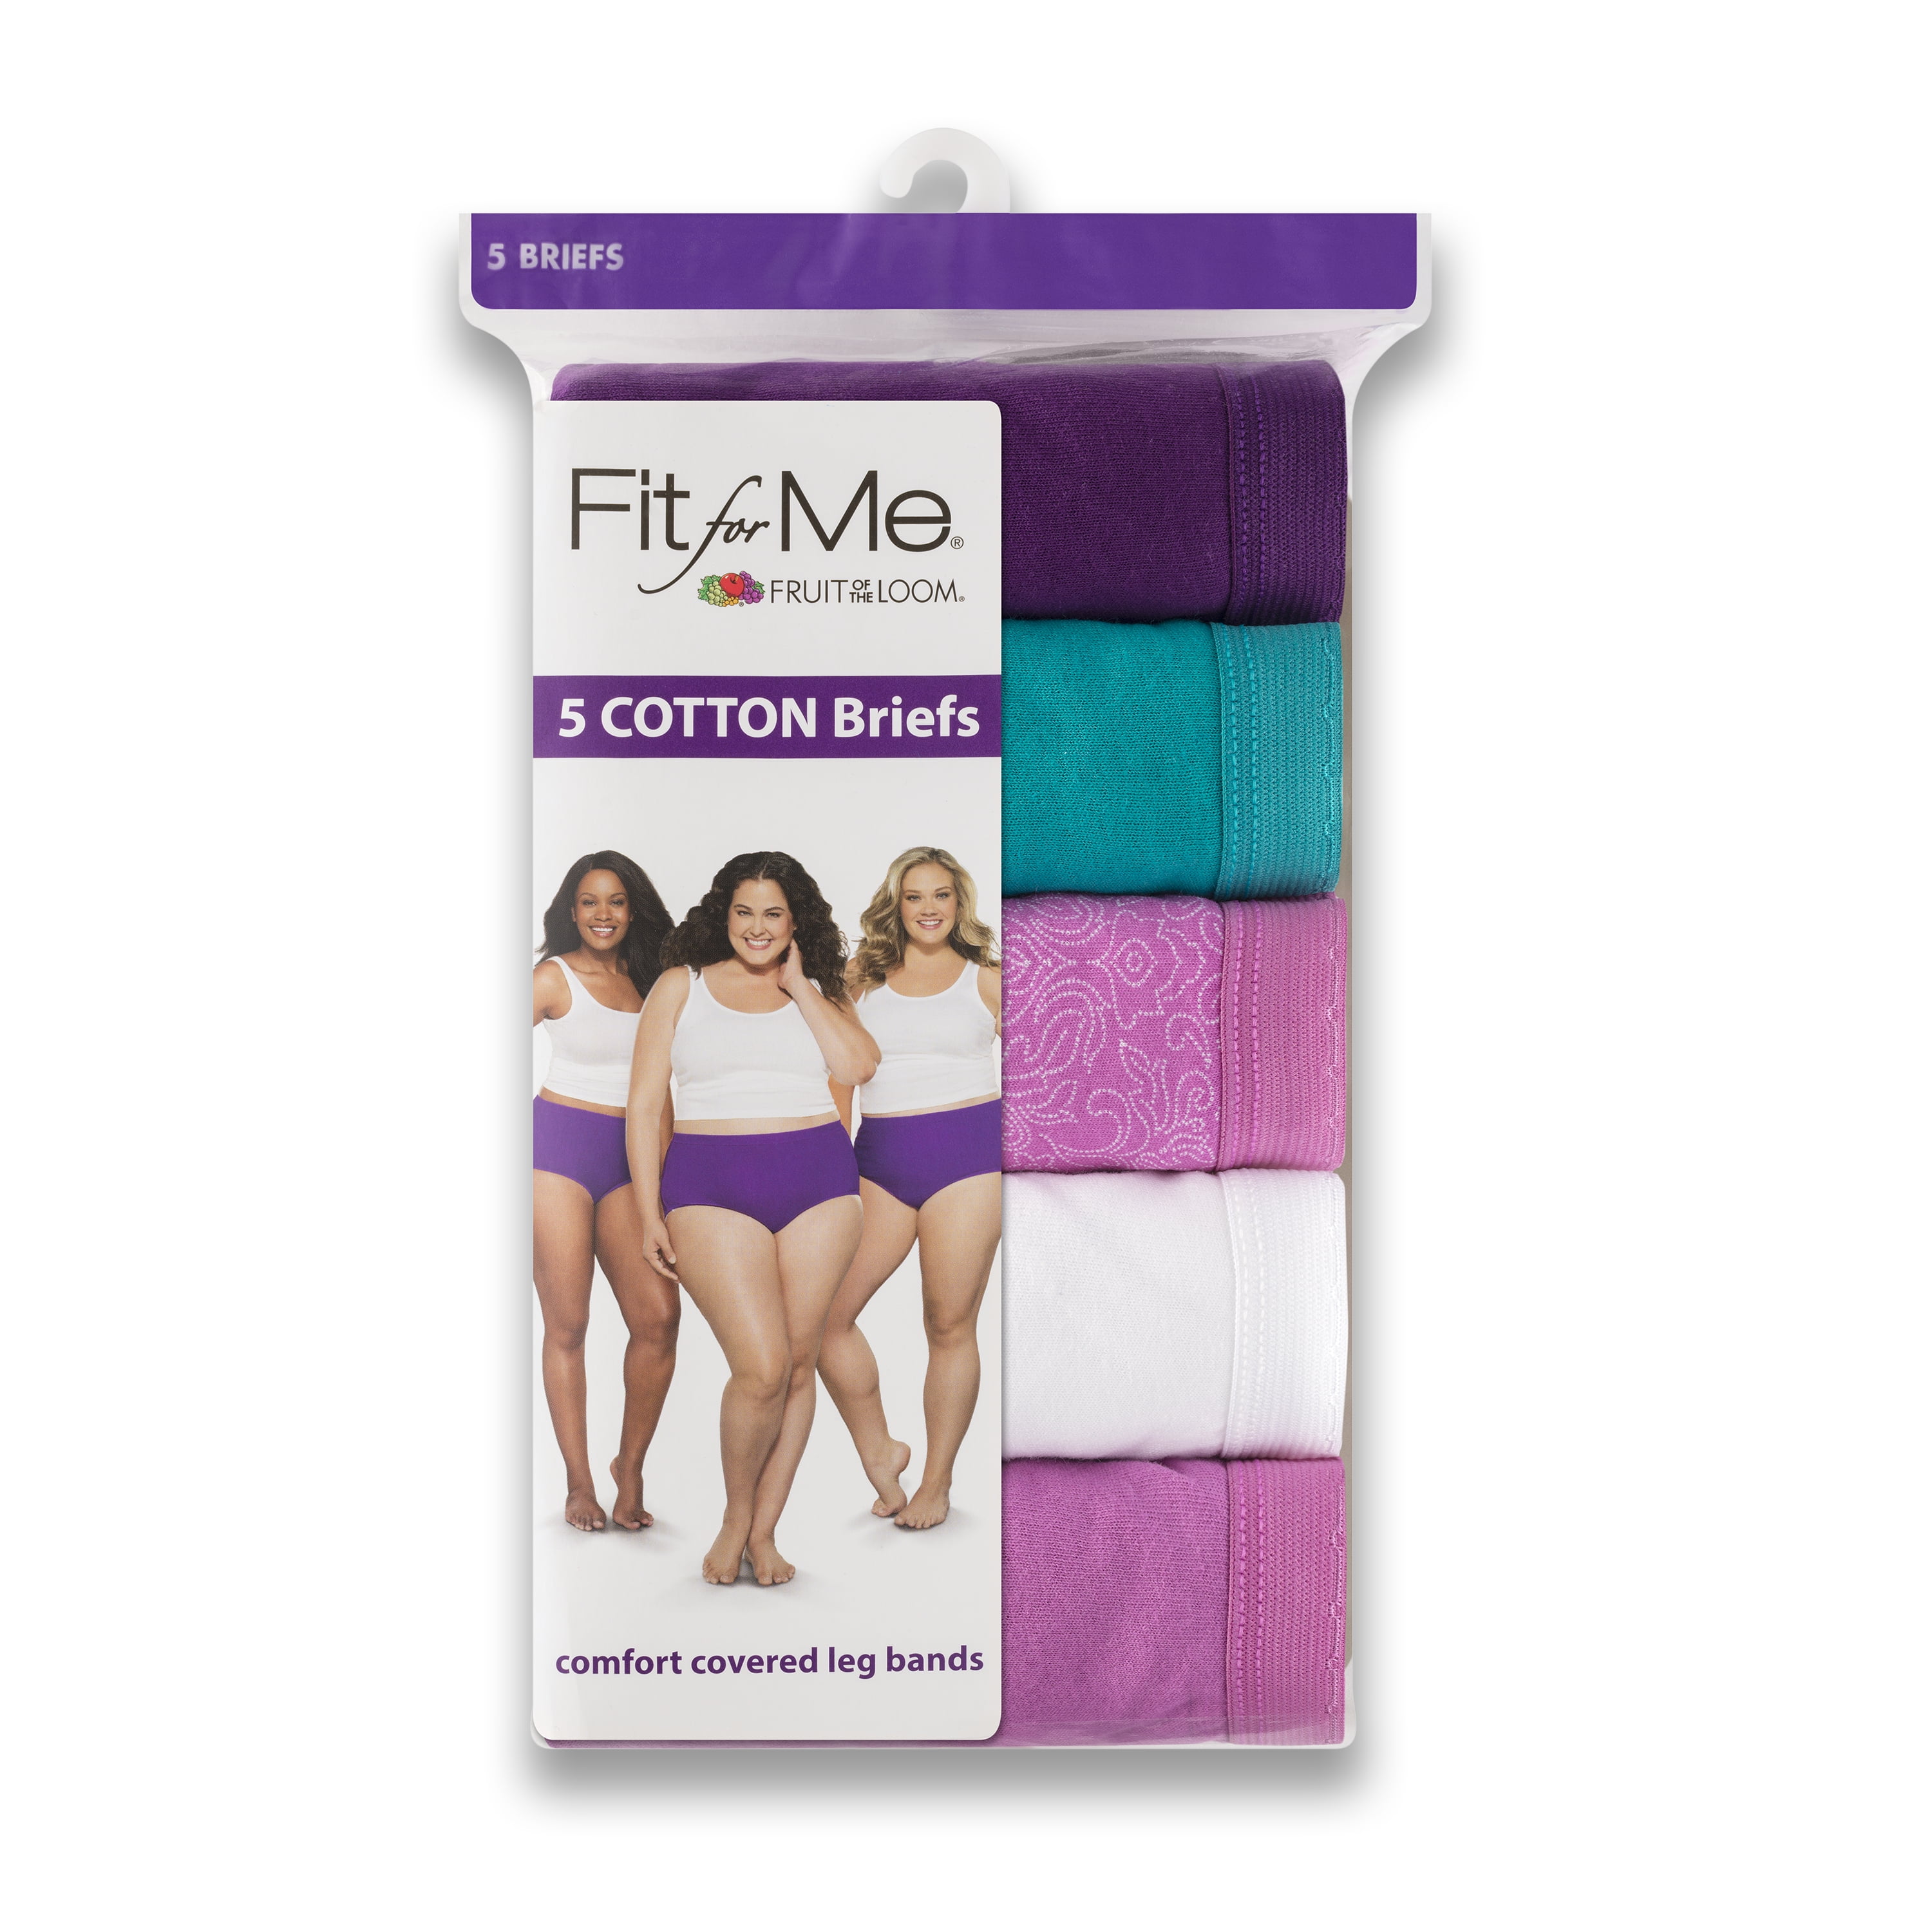 Fruit of the Loom Women's Fit for Me Cotton Brief, 5-Pack, Sizes: 9-13 